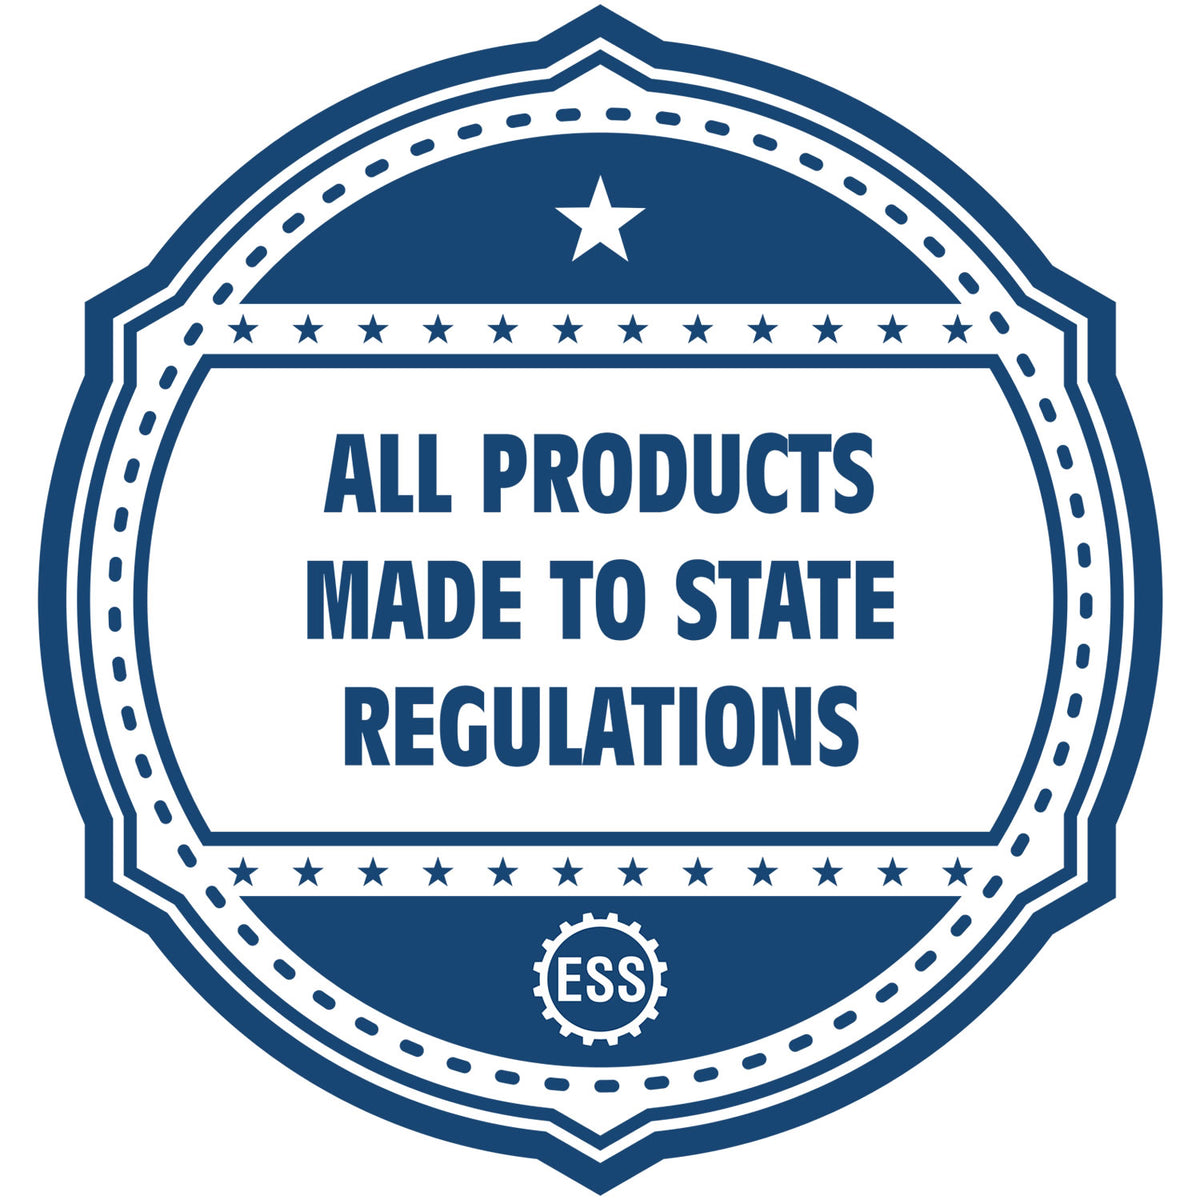 A blue icon or badge for the Hybrid Wyoming Landscape Architect Seal showing that this product is made in compliance with state regulations.